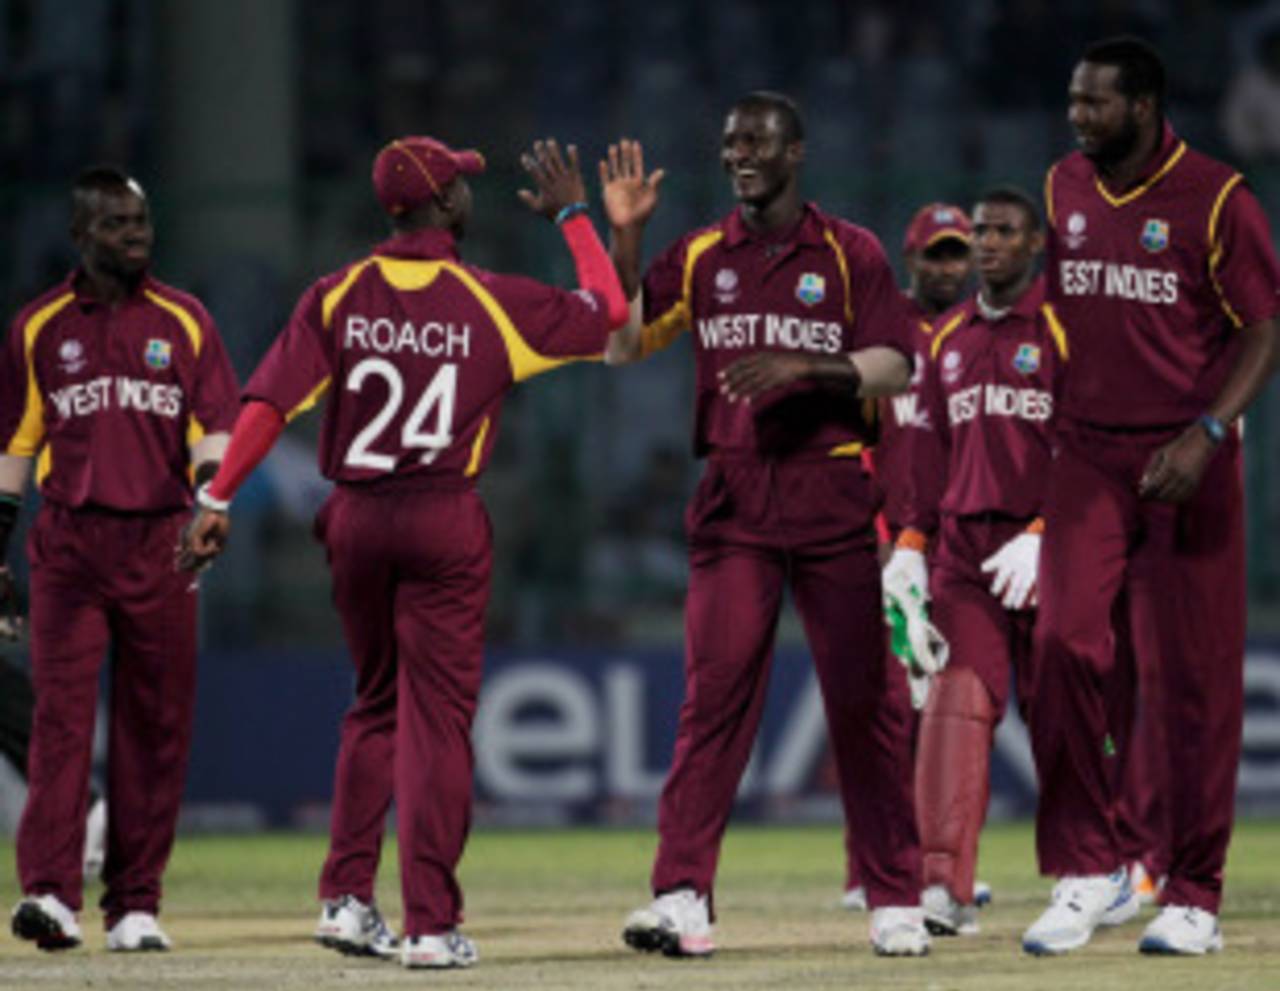 The West Indies had plenty to feel good about after their comprehensive win over the Netherlands&nbsp;&nbsp;&bull;&nbsp;&nbsp;Getty Images